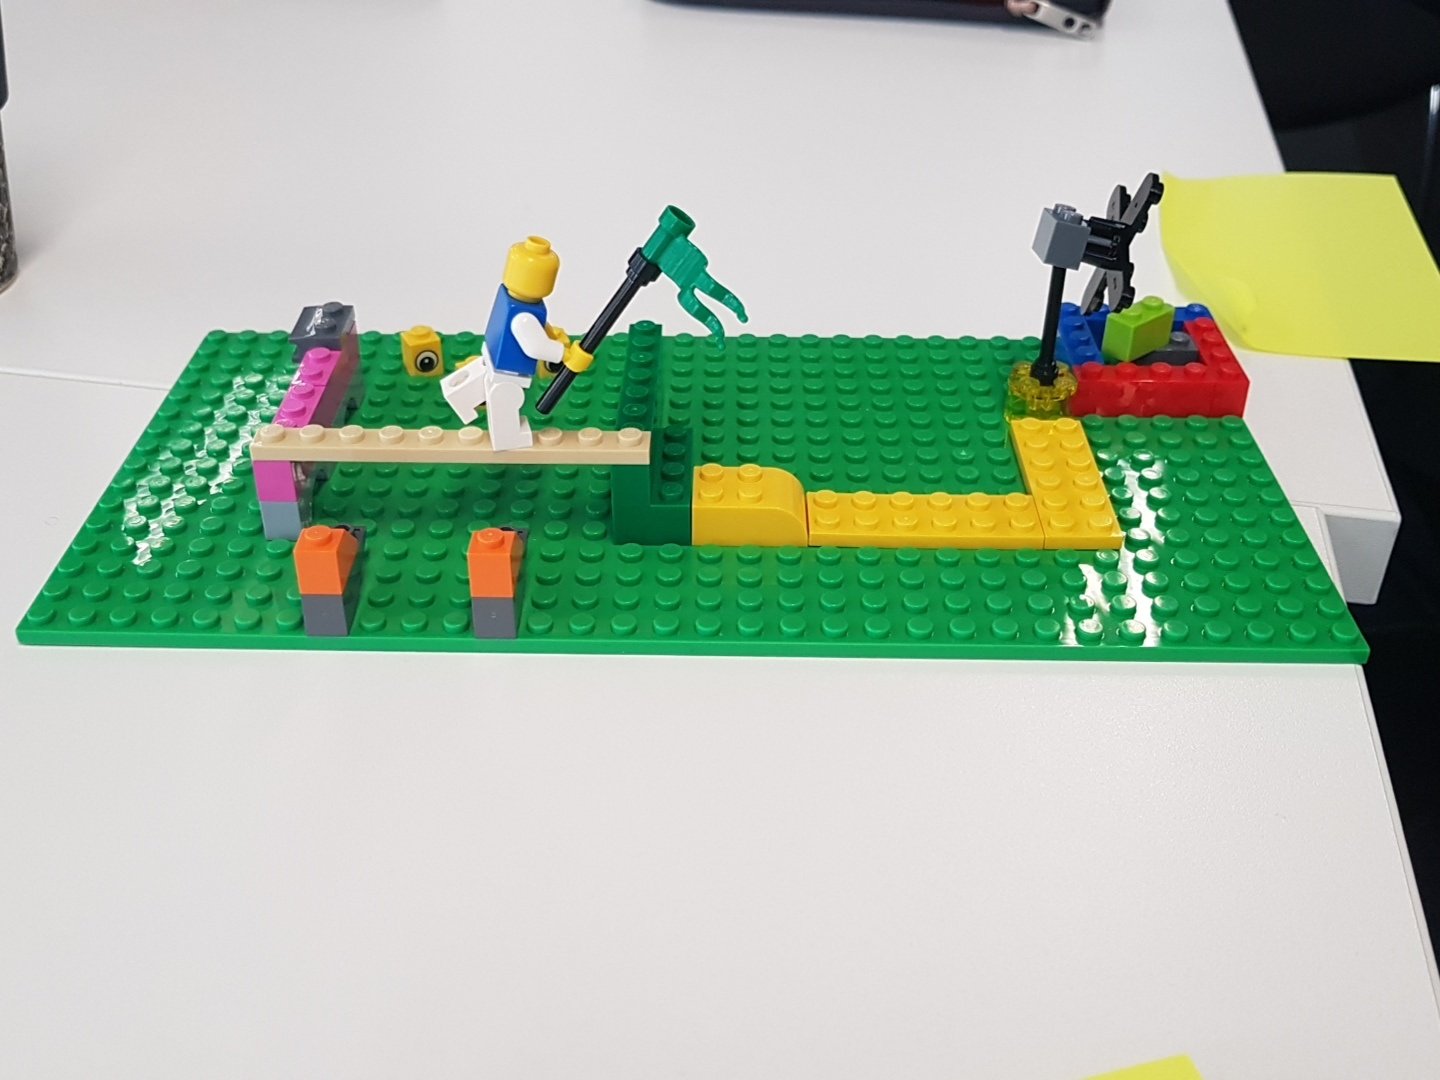 #SocMedHE17 our joint lego build about our professional identity @Andy_Tattersall https://t.co/RDt3olziLh